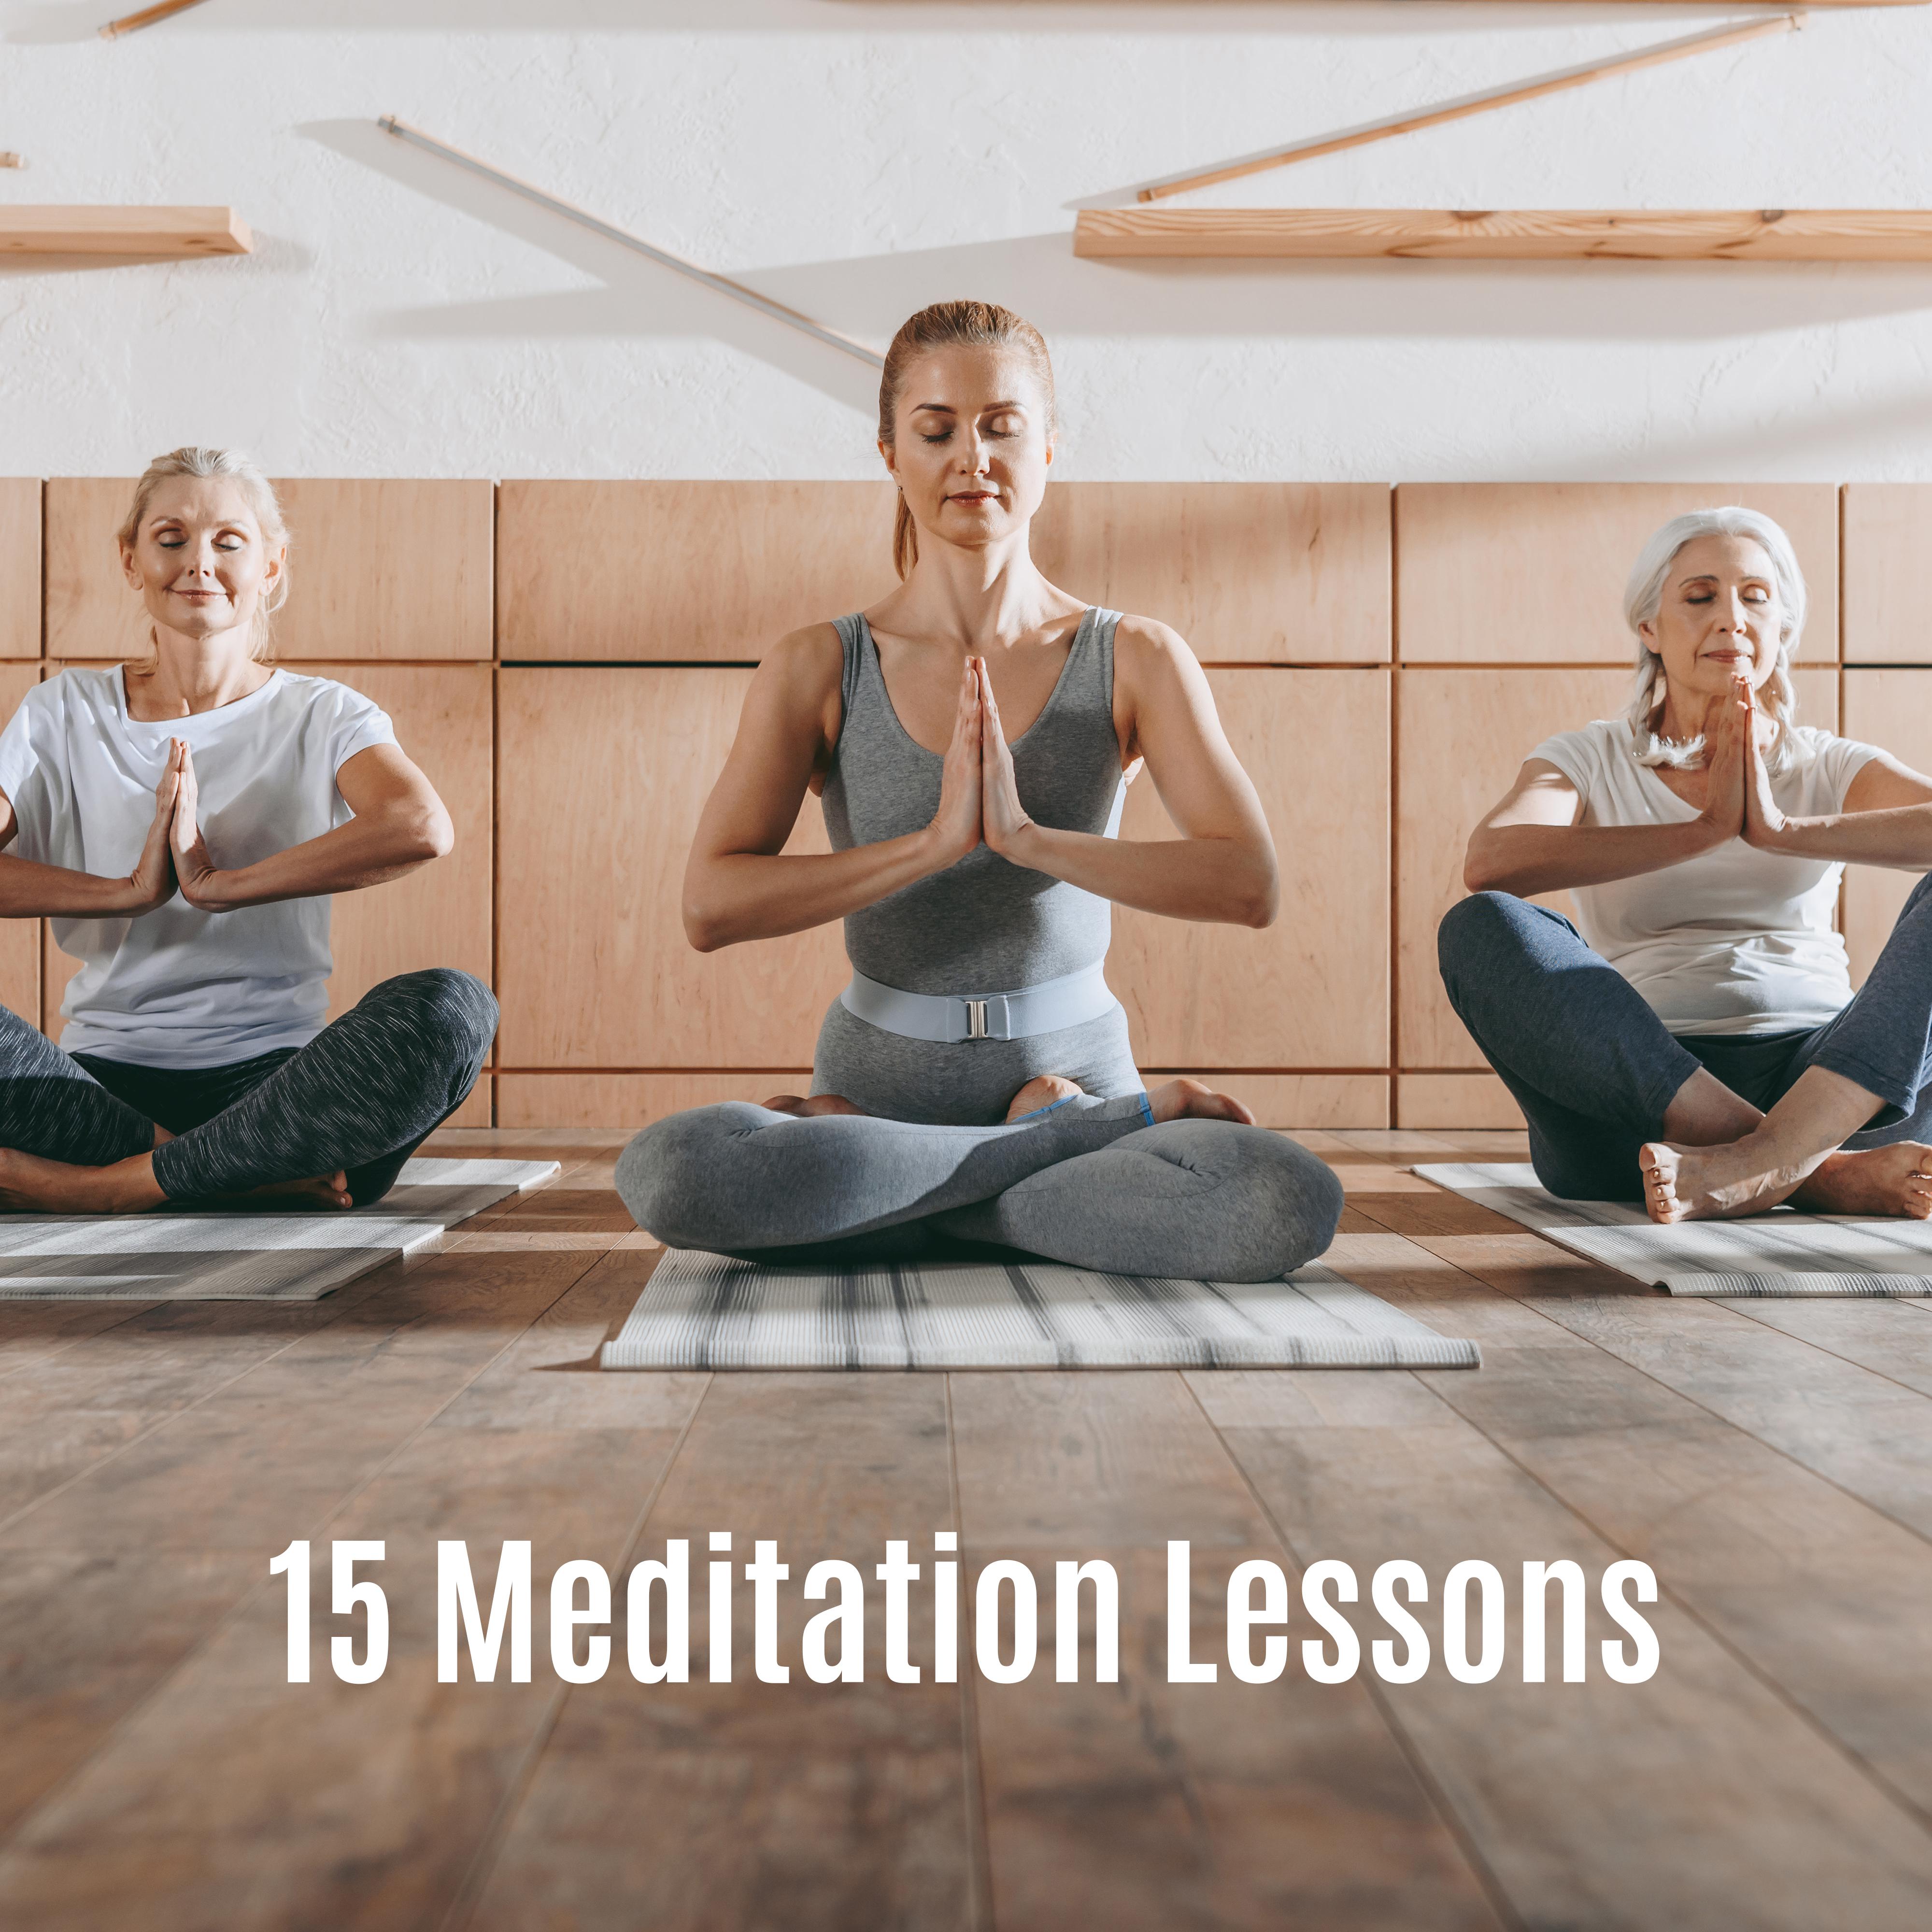 15 Meditation Lessons: 2019 New Age Music Compilation for Beginner' s Yoga Training  Relaxation, Train All Poses from Rookie to Pro, Improve Your Focus, Increase Vital Energy